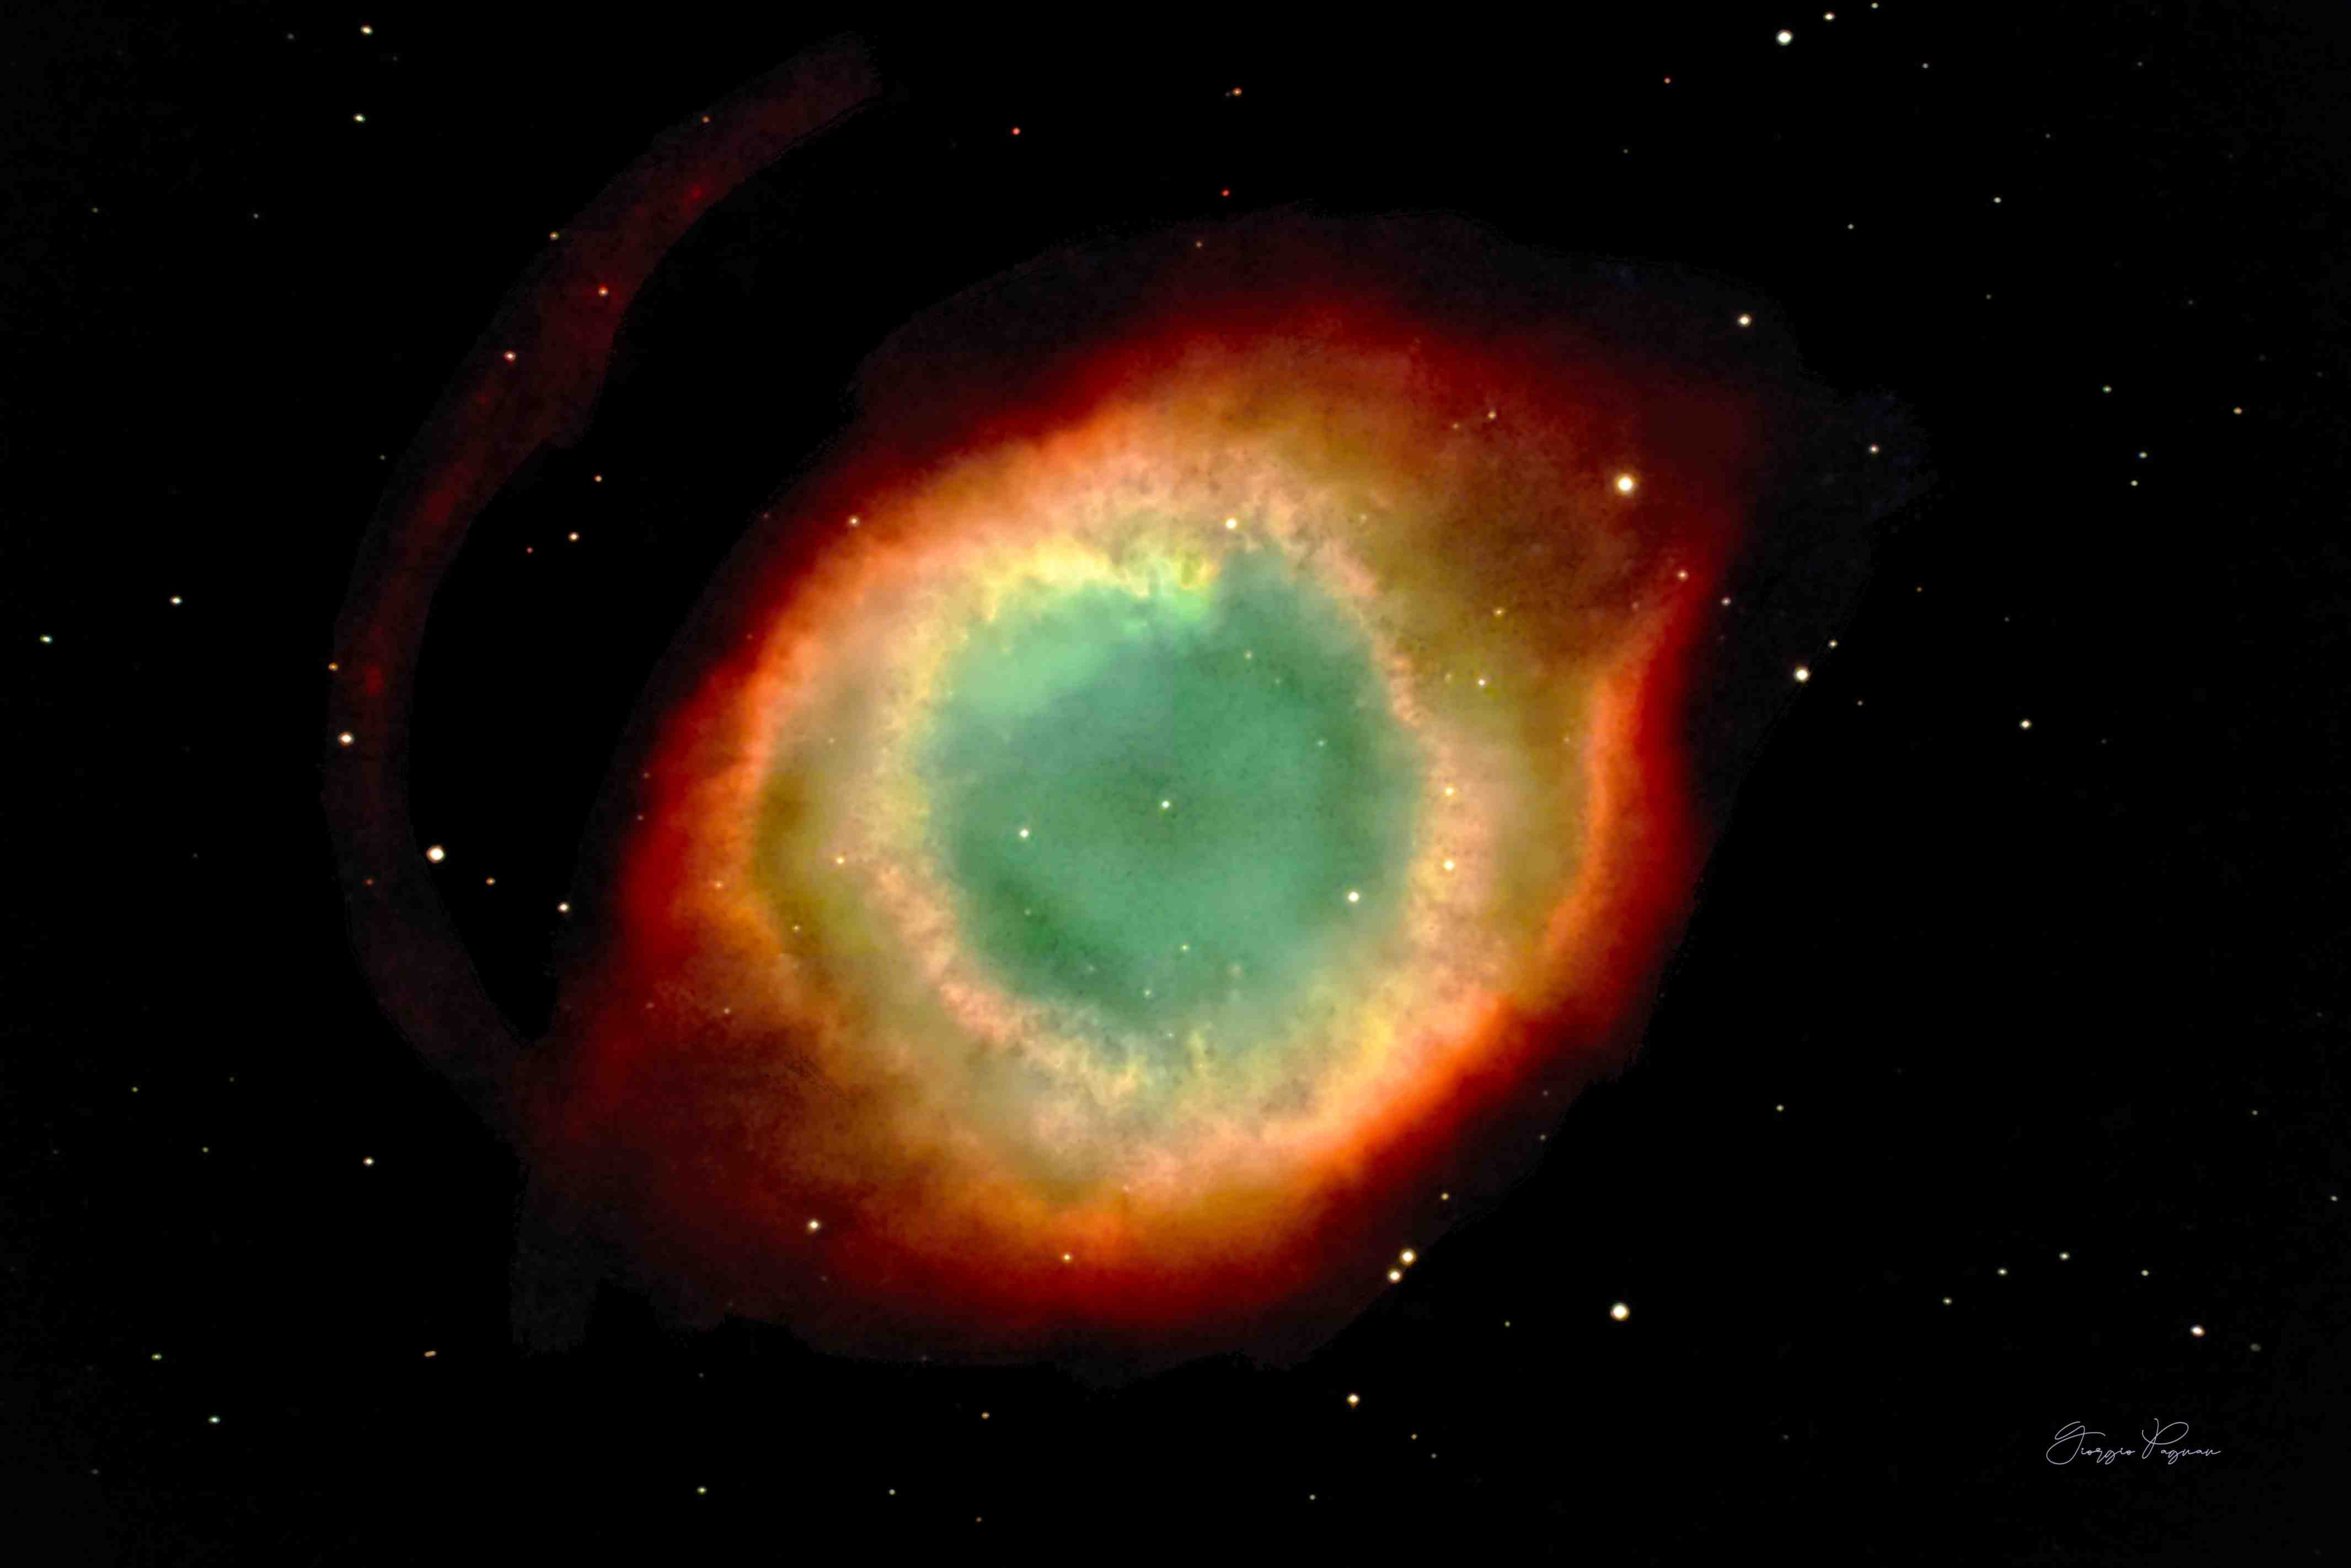 Helix Nebula Eye of God with eyebrow andCarina & Gabriela Mistral nebula with oxygen green and red hydrogen gas 